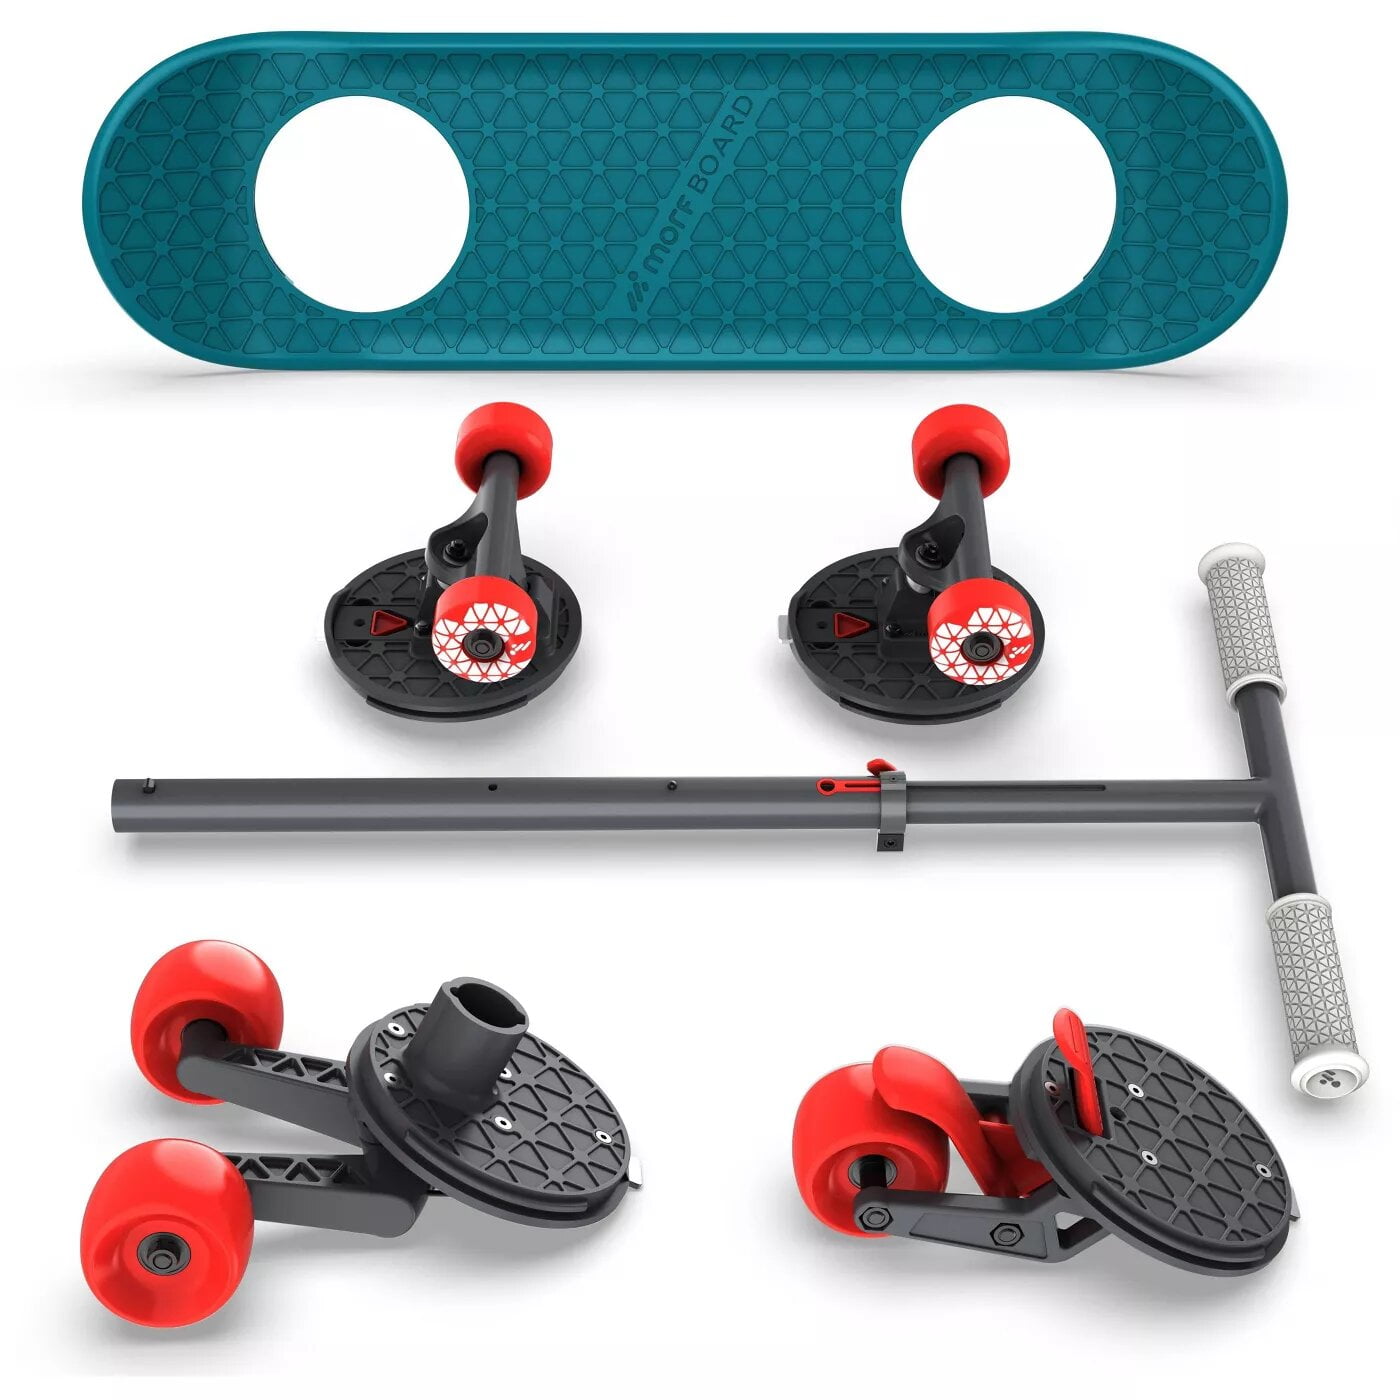 New Open Box MorfBoard Scooter & Skateboard Combo Set Blue/Red Sunset 